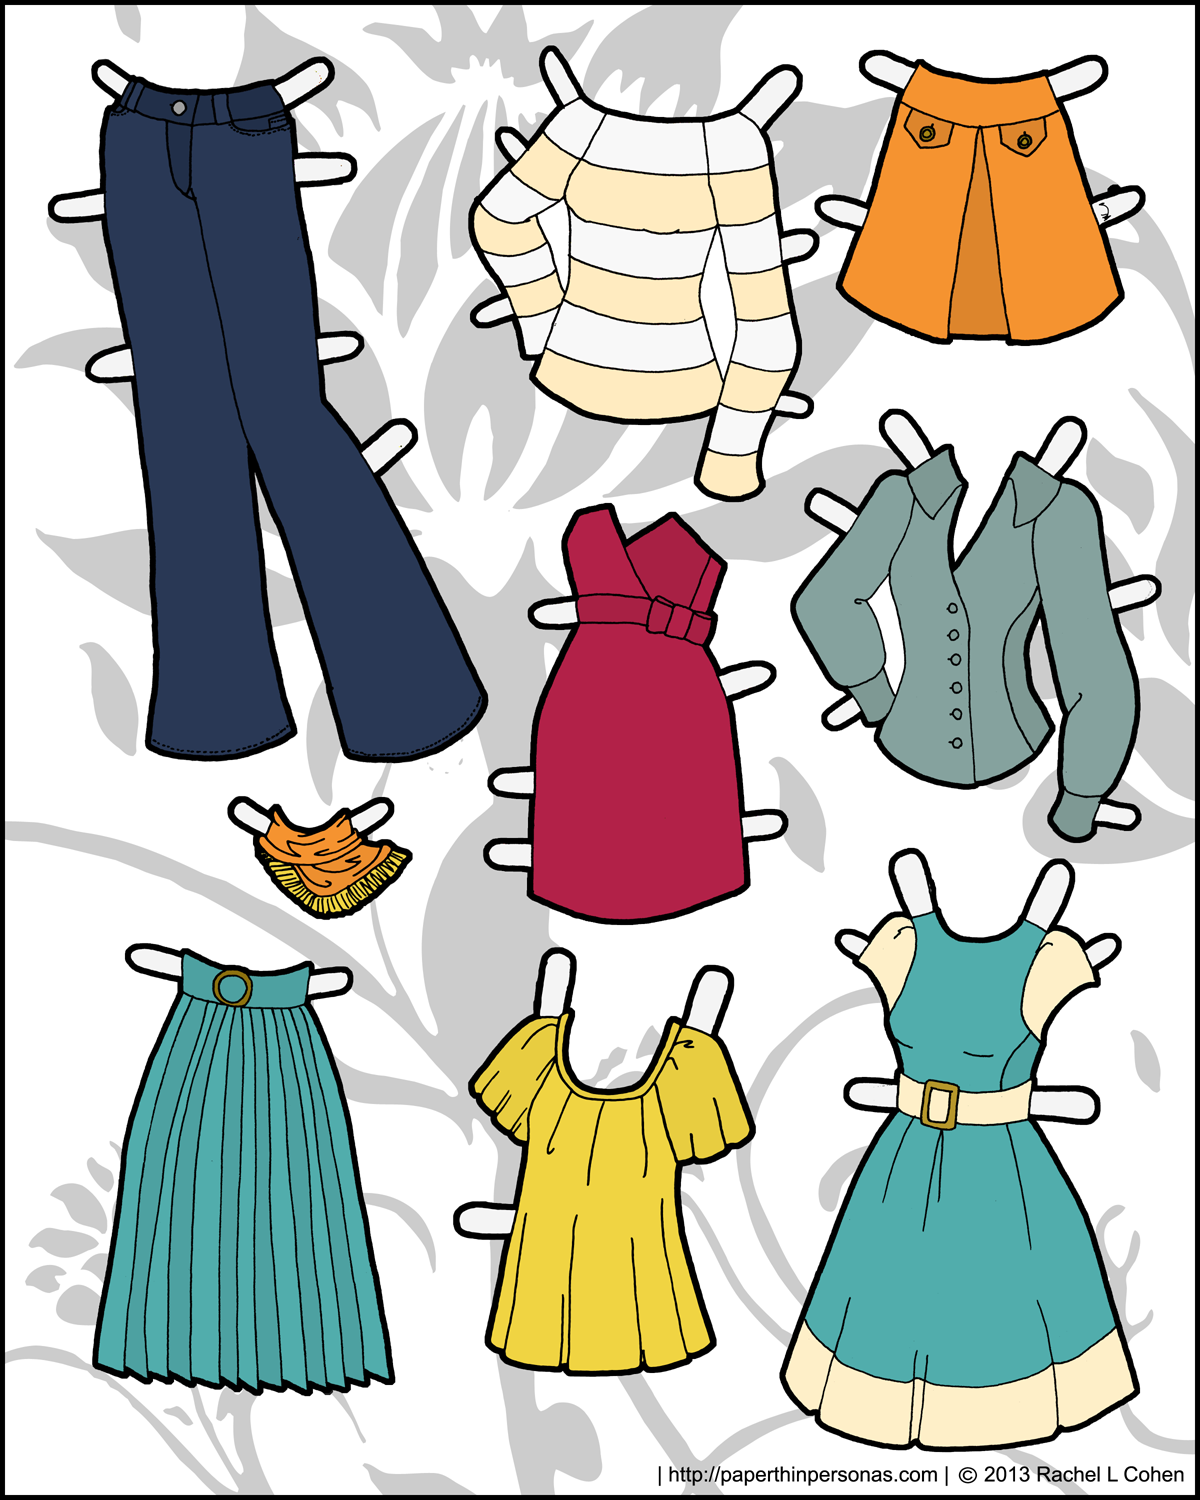 And yet more clothing for the Ms Mannequin Printable Paper Dolls